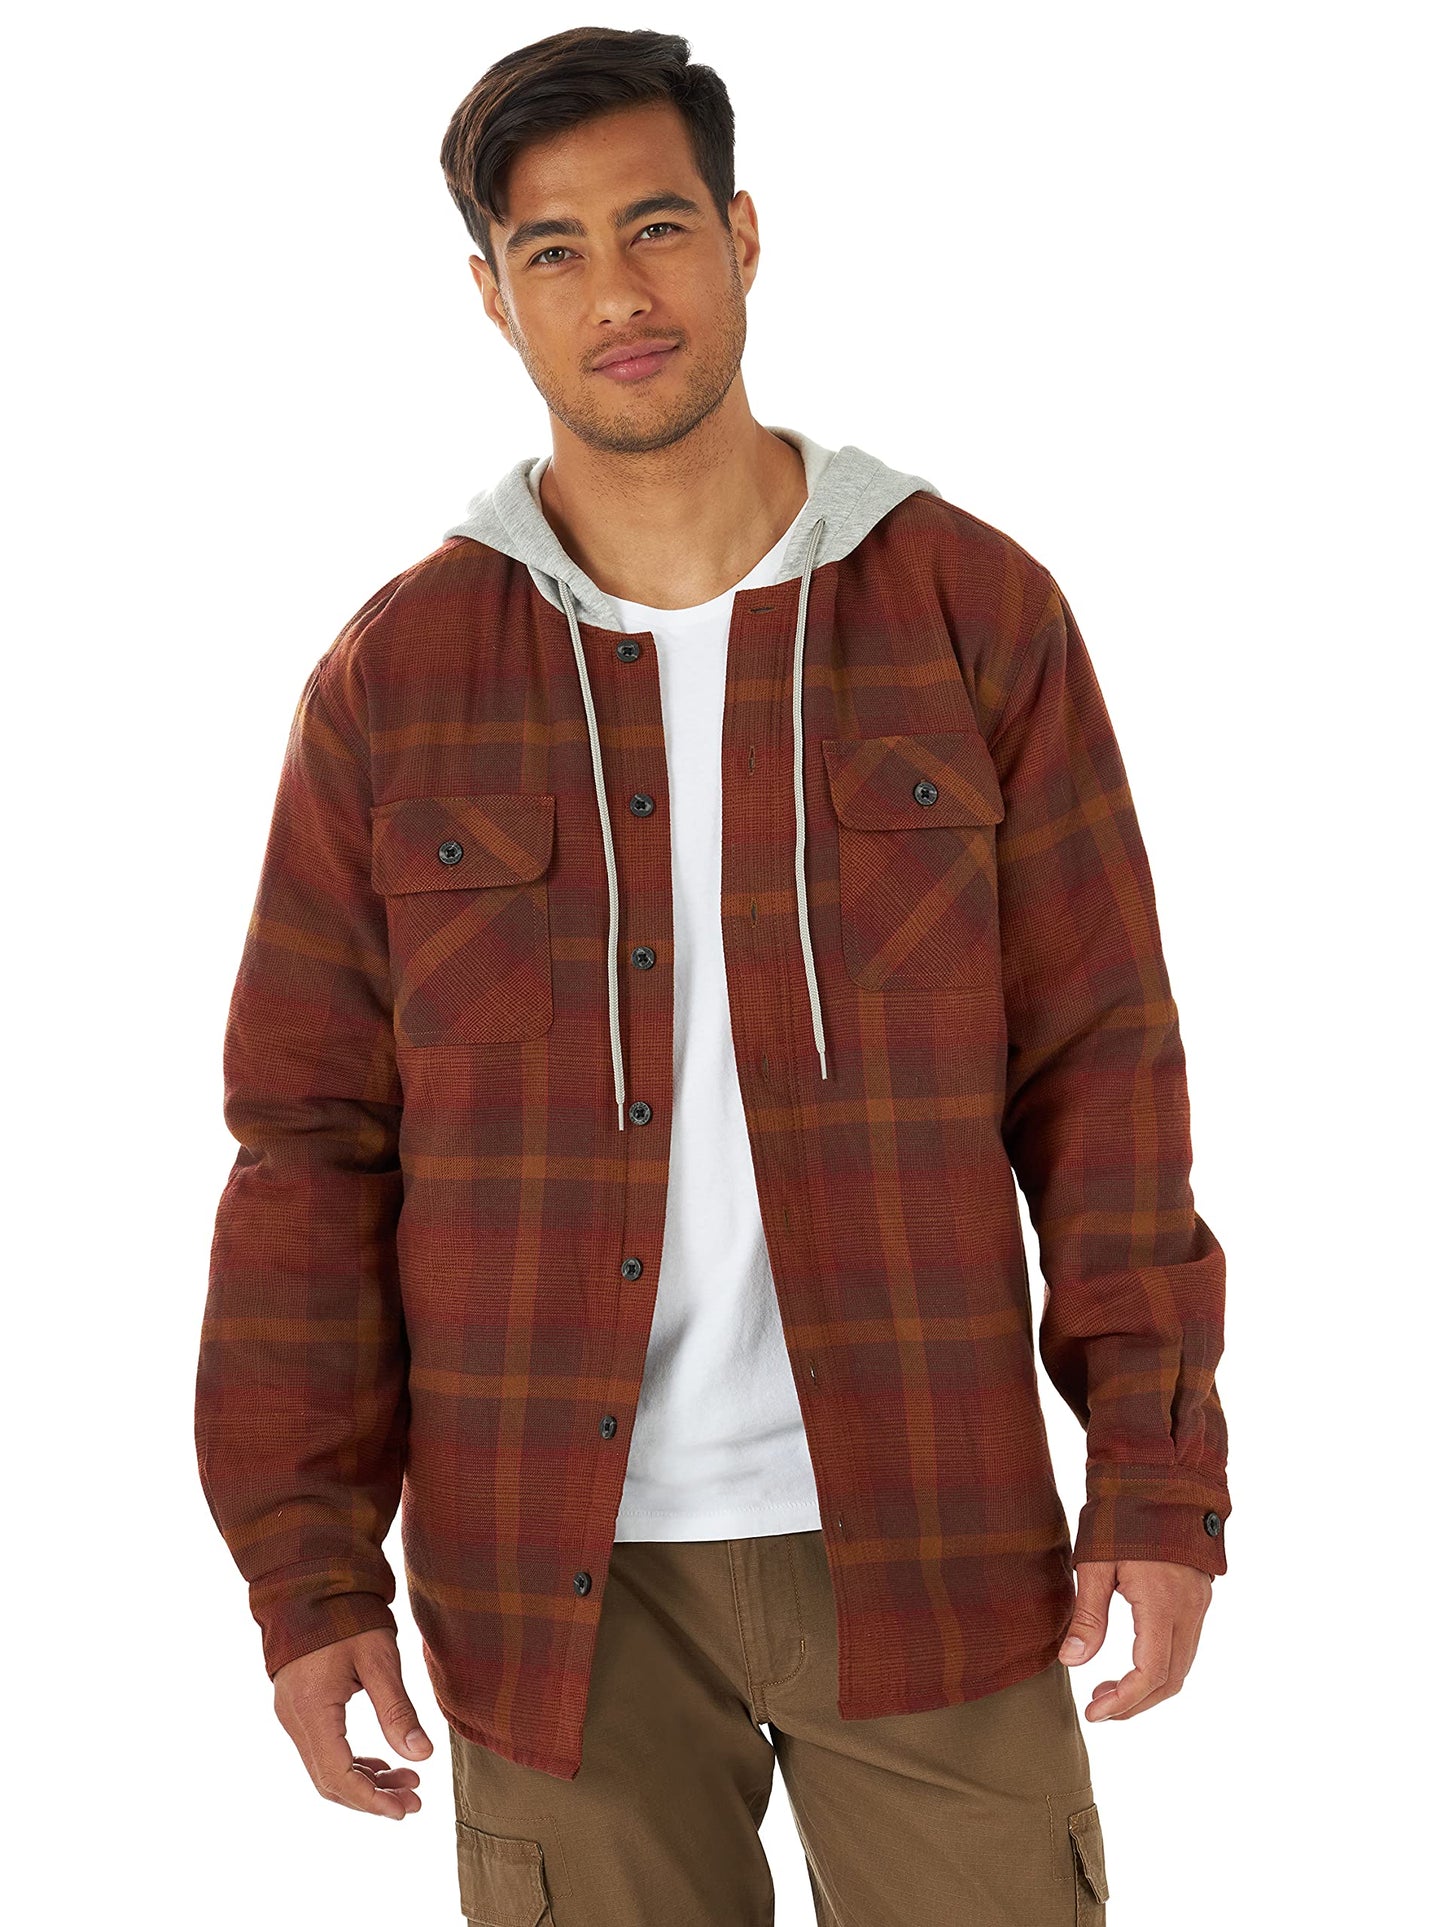 Wrangler Authentics Men's Long Sleeve Quilted Lined Flannel Shirt Jacket with Hood, Toffee, Small